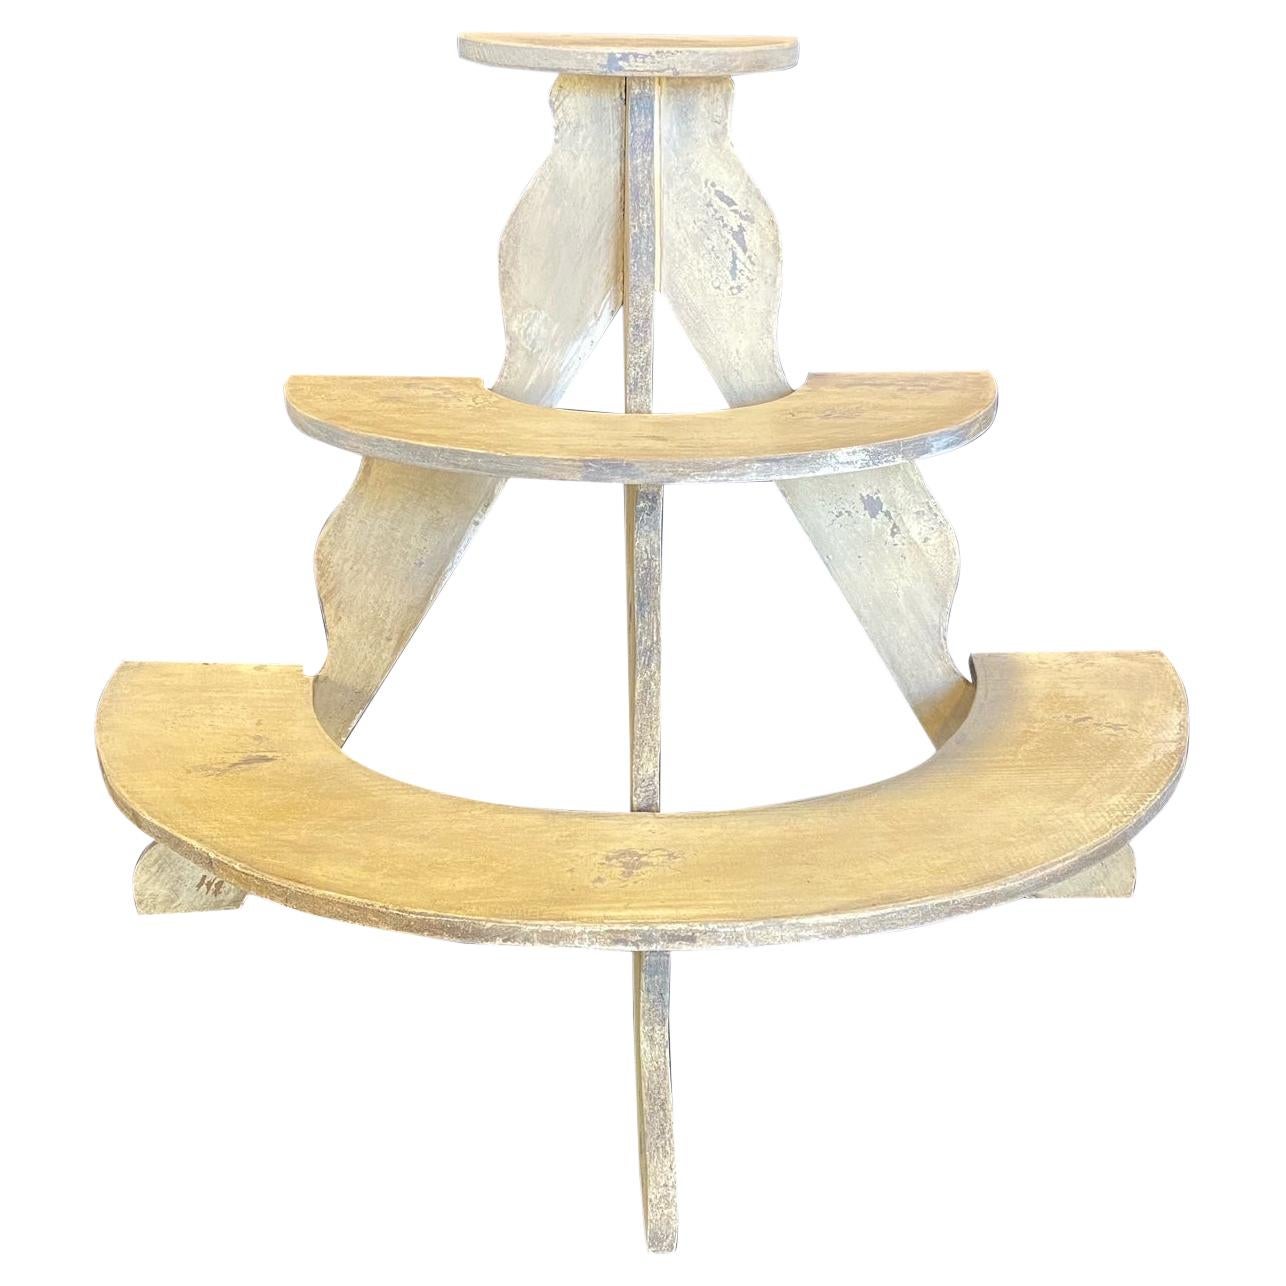 Charming Early American Three Tiered Plant Stand with Original Paint